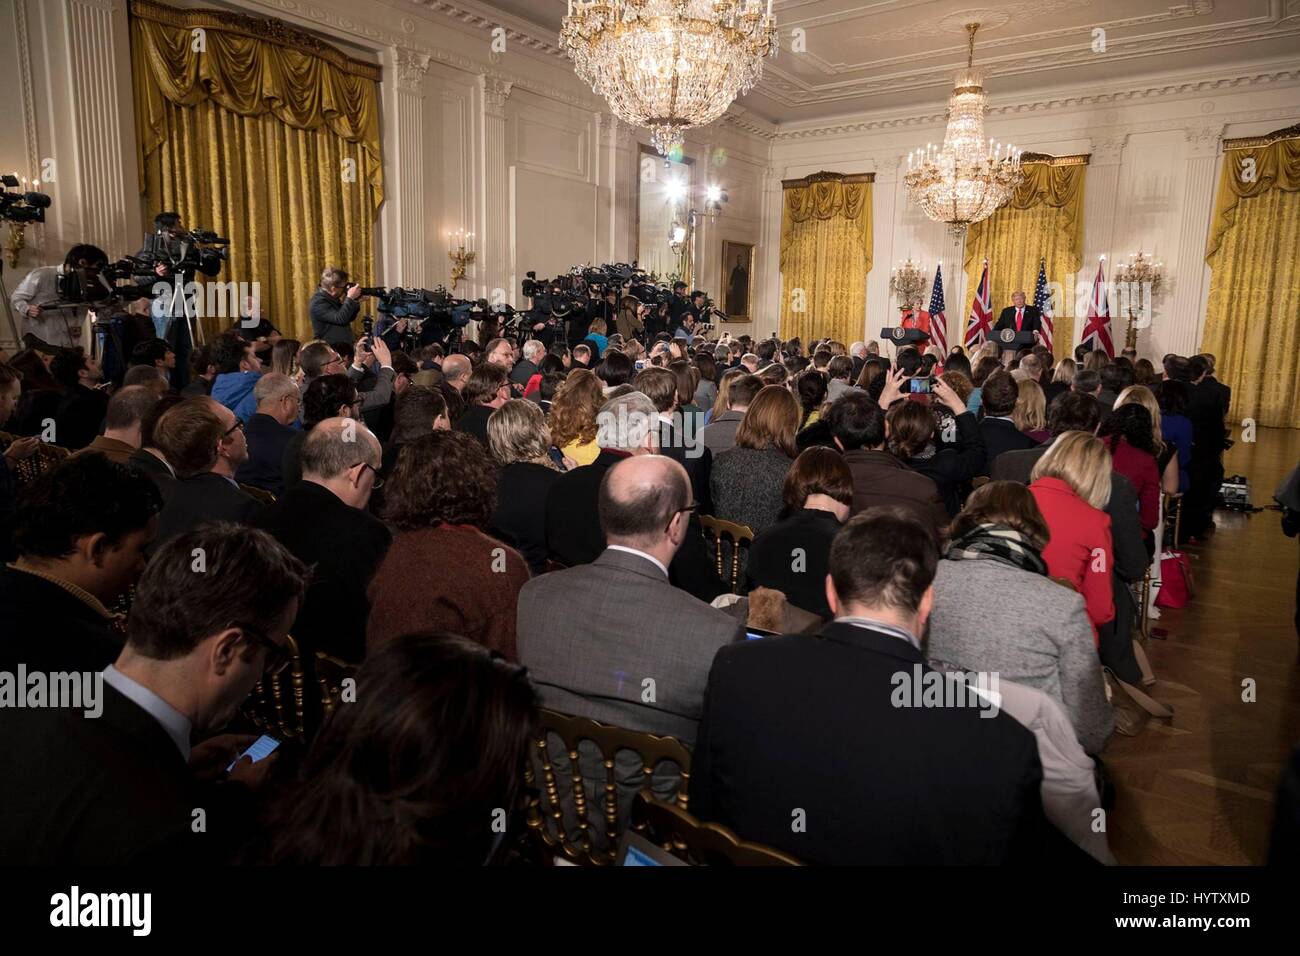 U.S President Donald Trump and British Prime Minister Theresa May hold a joint press conference in the East Room of the White House January 27, 2017 in Washington, DC. Stock Photo